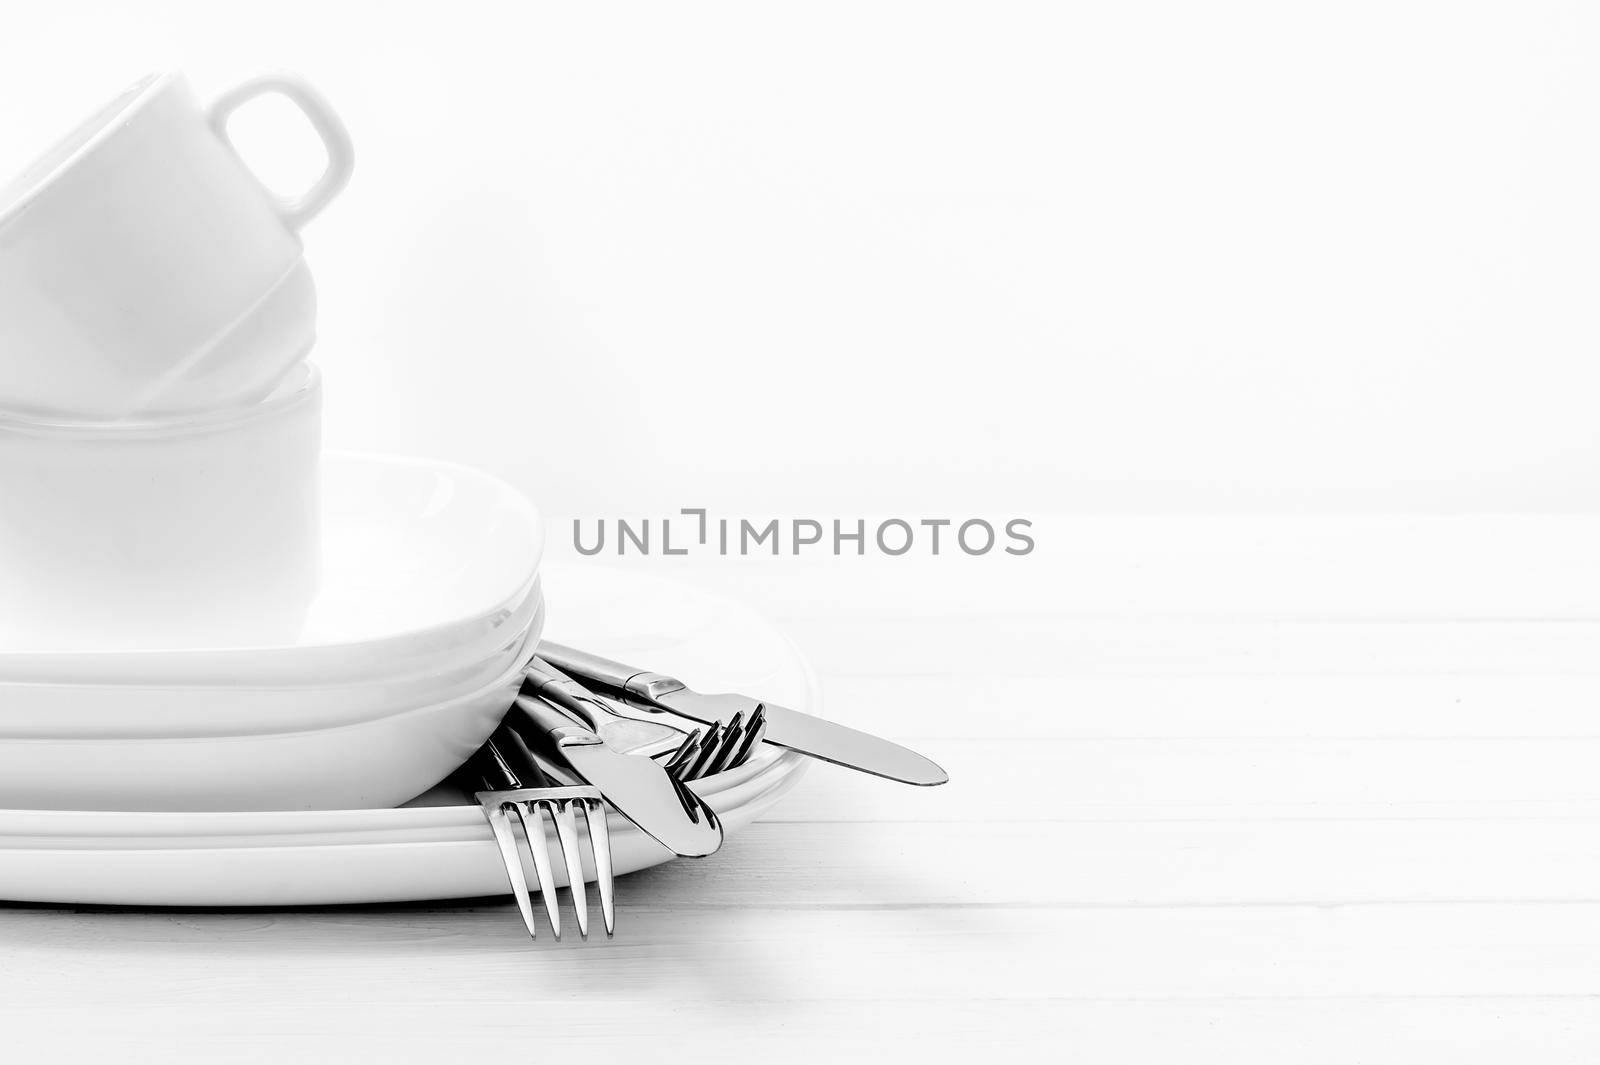 Plates, cups and silver cutlery on light white background by tan4ikk1